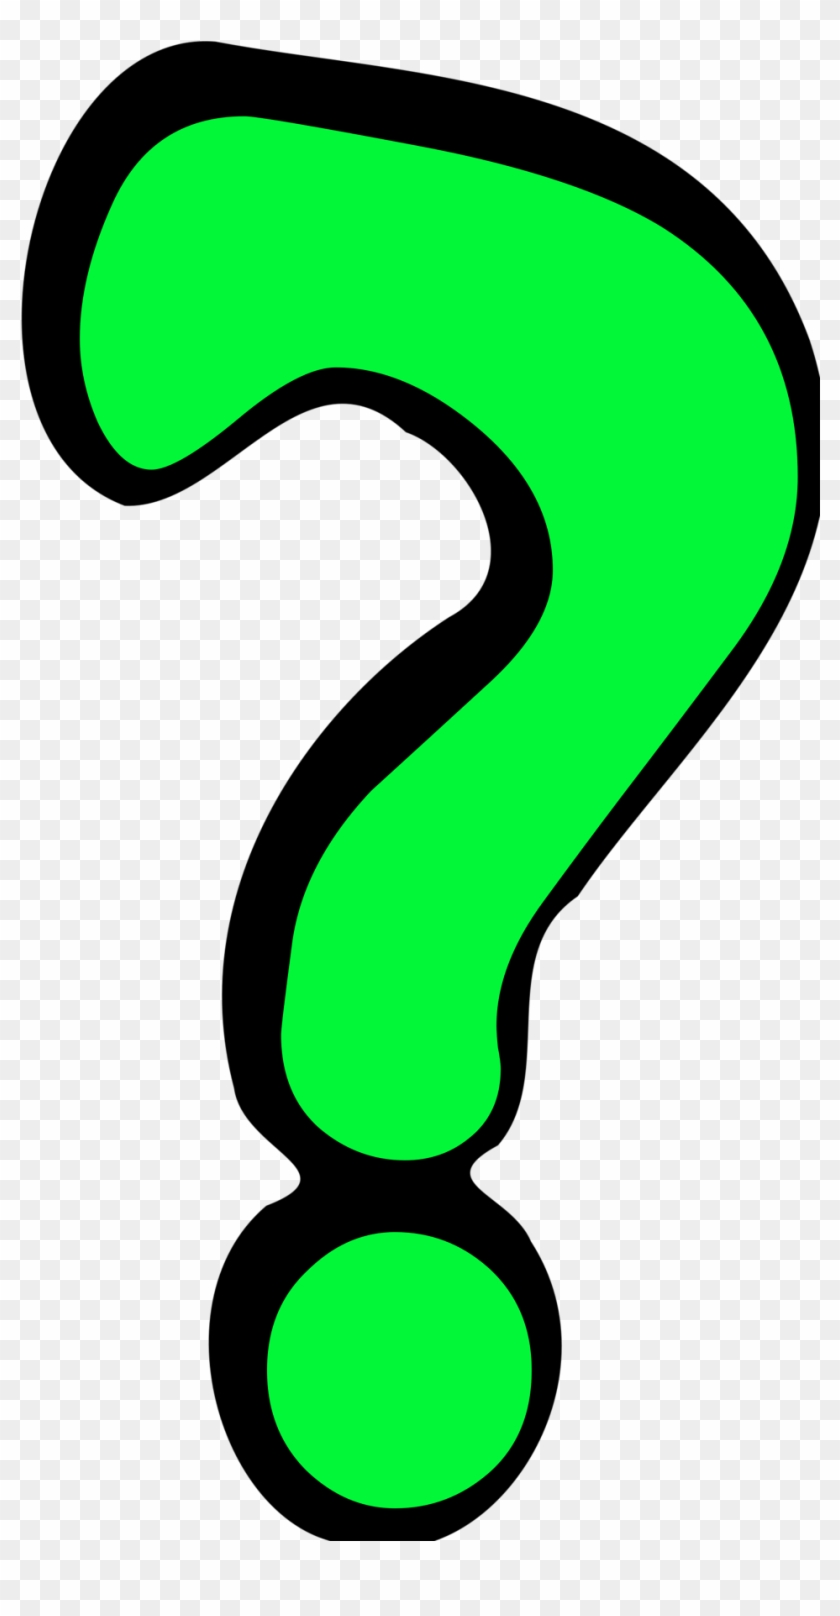 Question Mark Clip Art Image Black And White F F A - Question Mark Clipart - Png Download